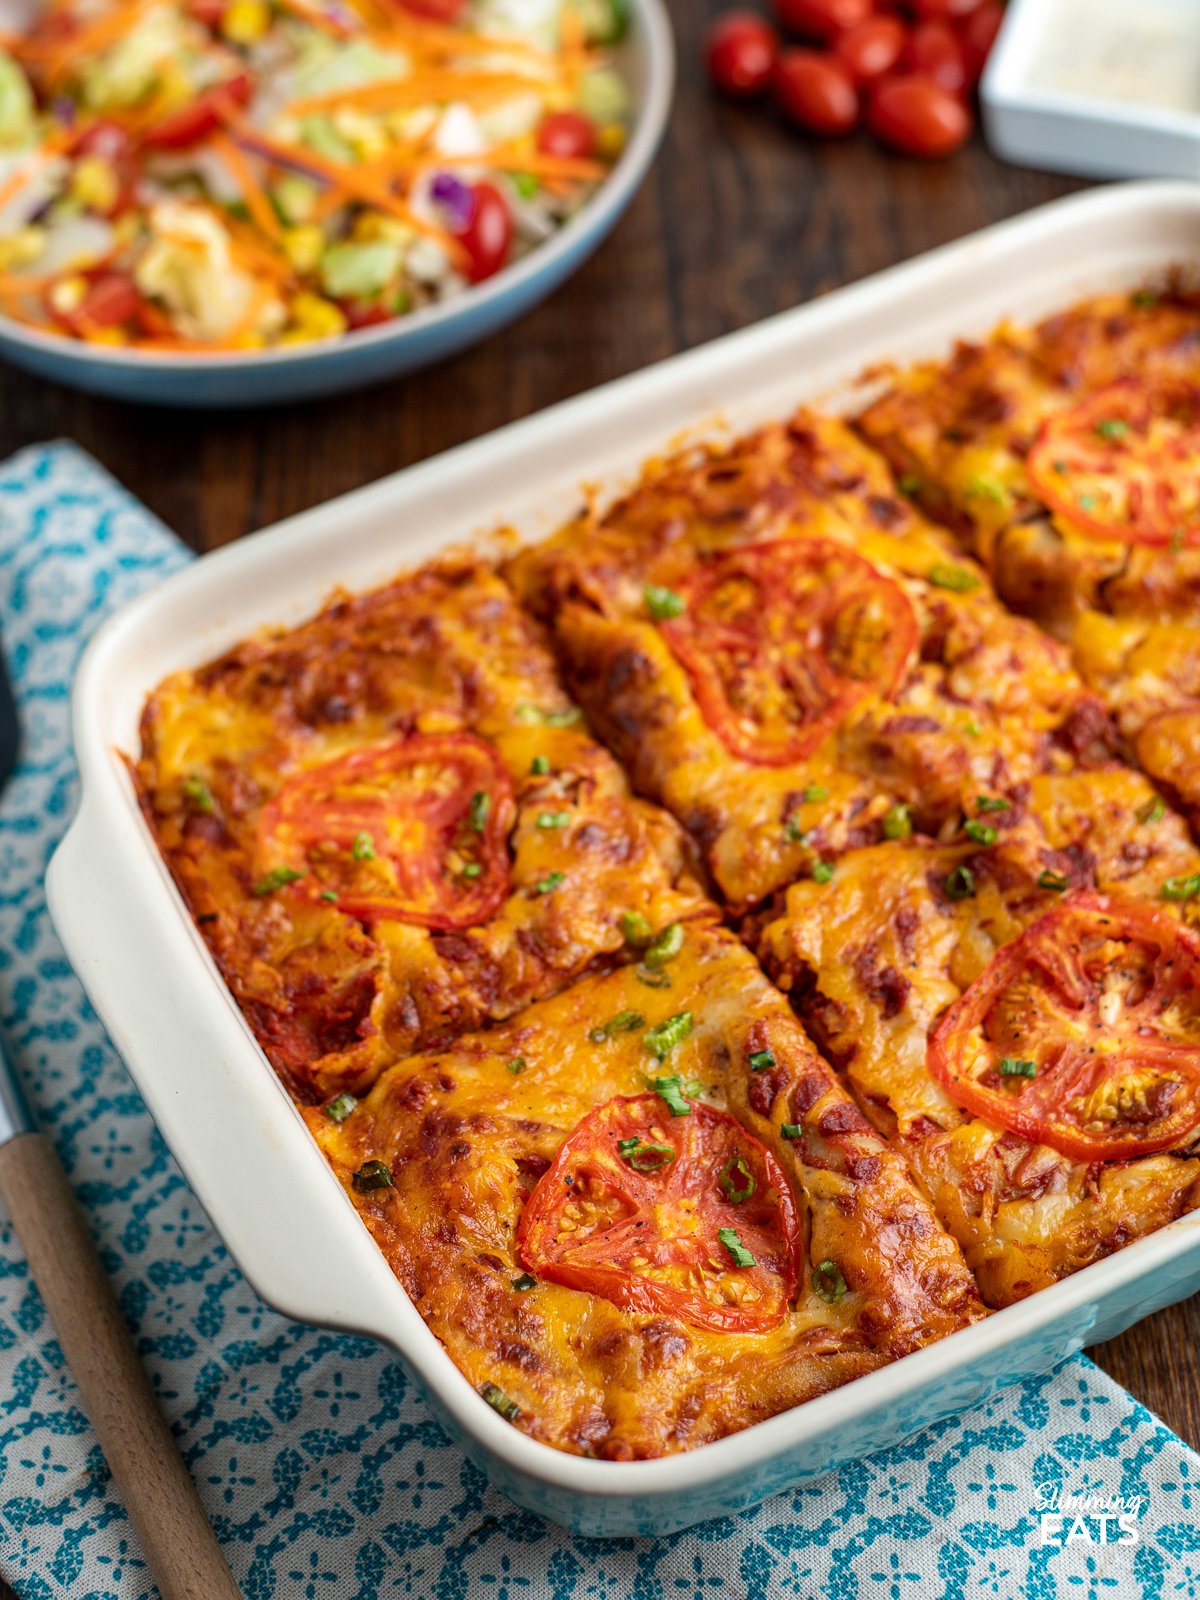 Spicy Mexican Chicken Lasagne sliced into servings in a oven baking dish, with a bowl of salad in background